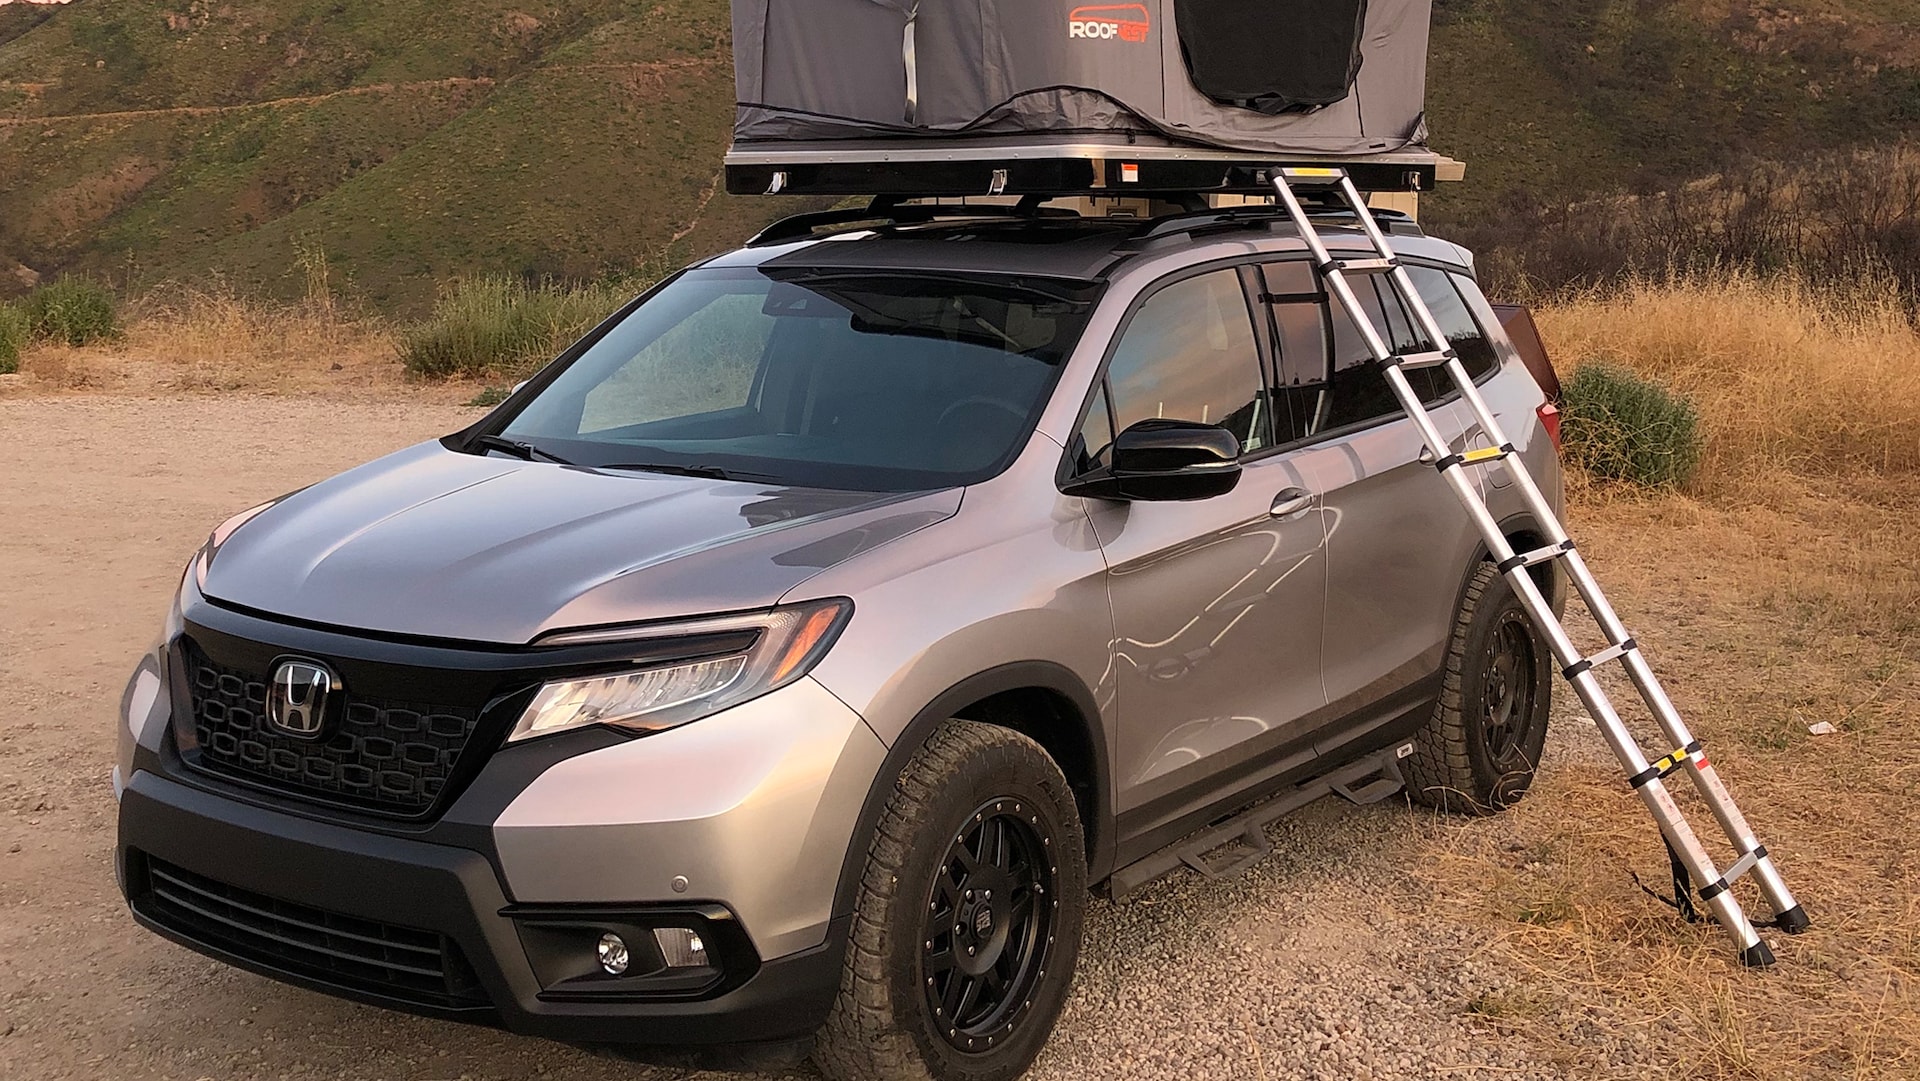 Review: Honda's Passport Overland Camper Can Hit Roads Less Traveled